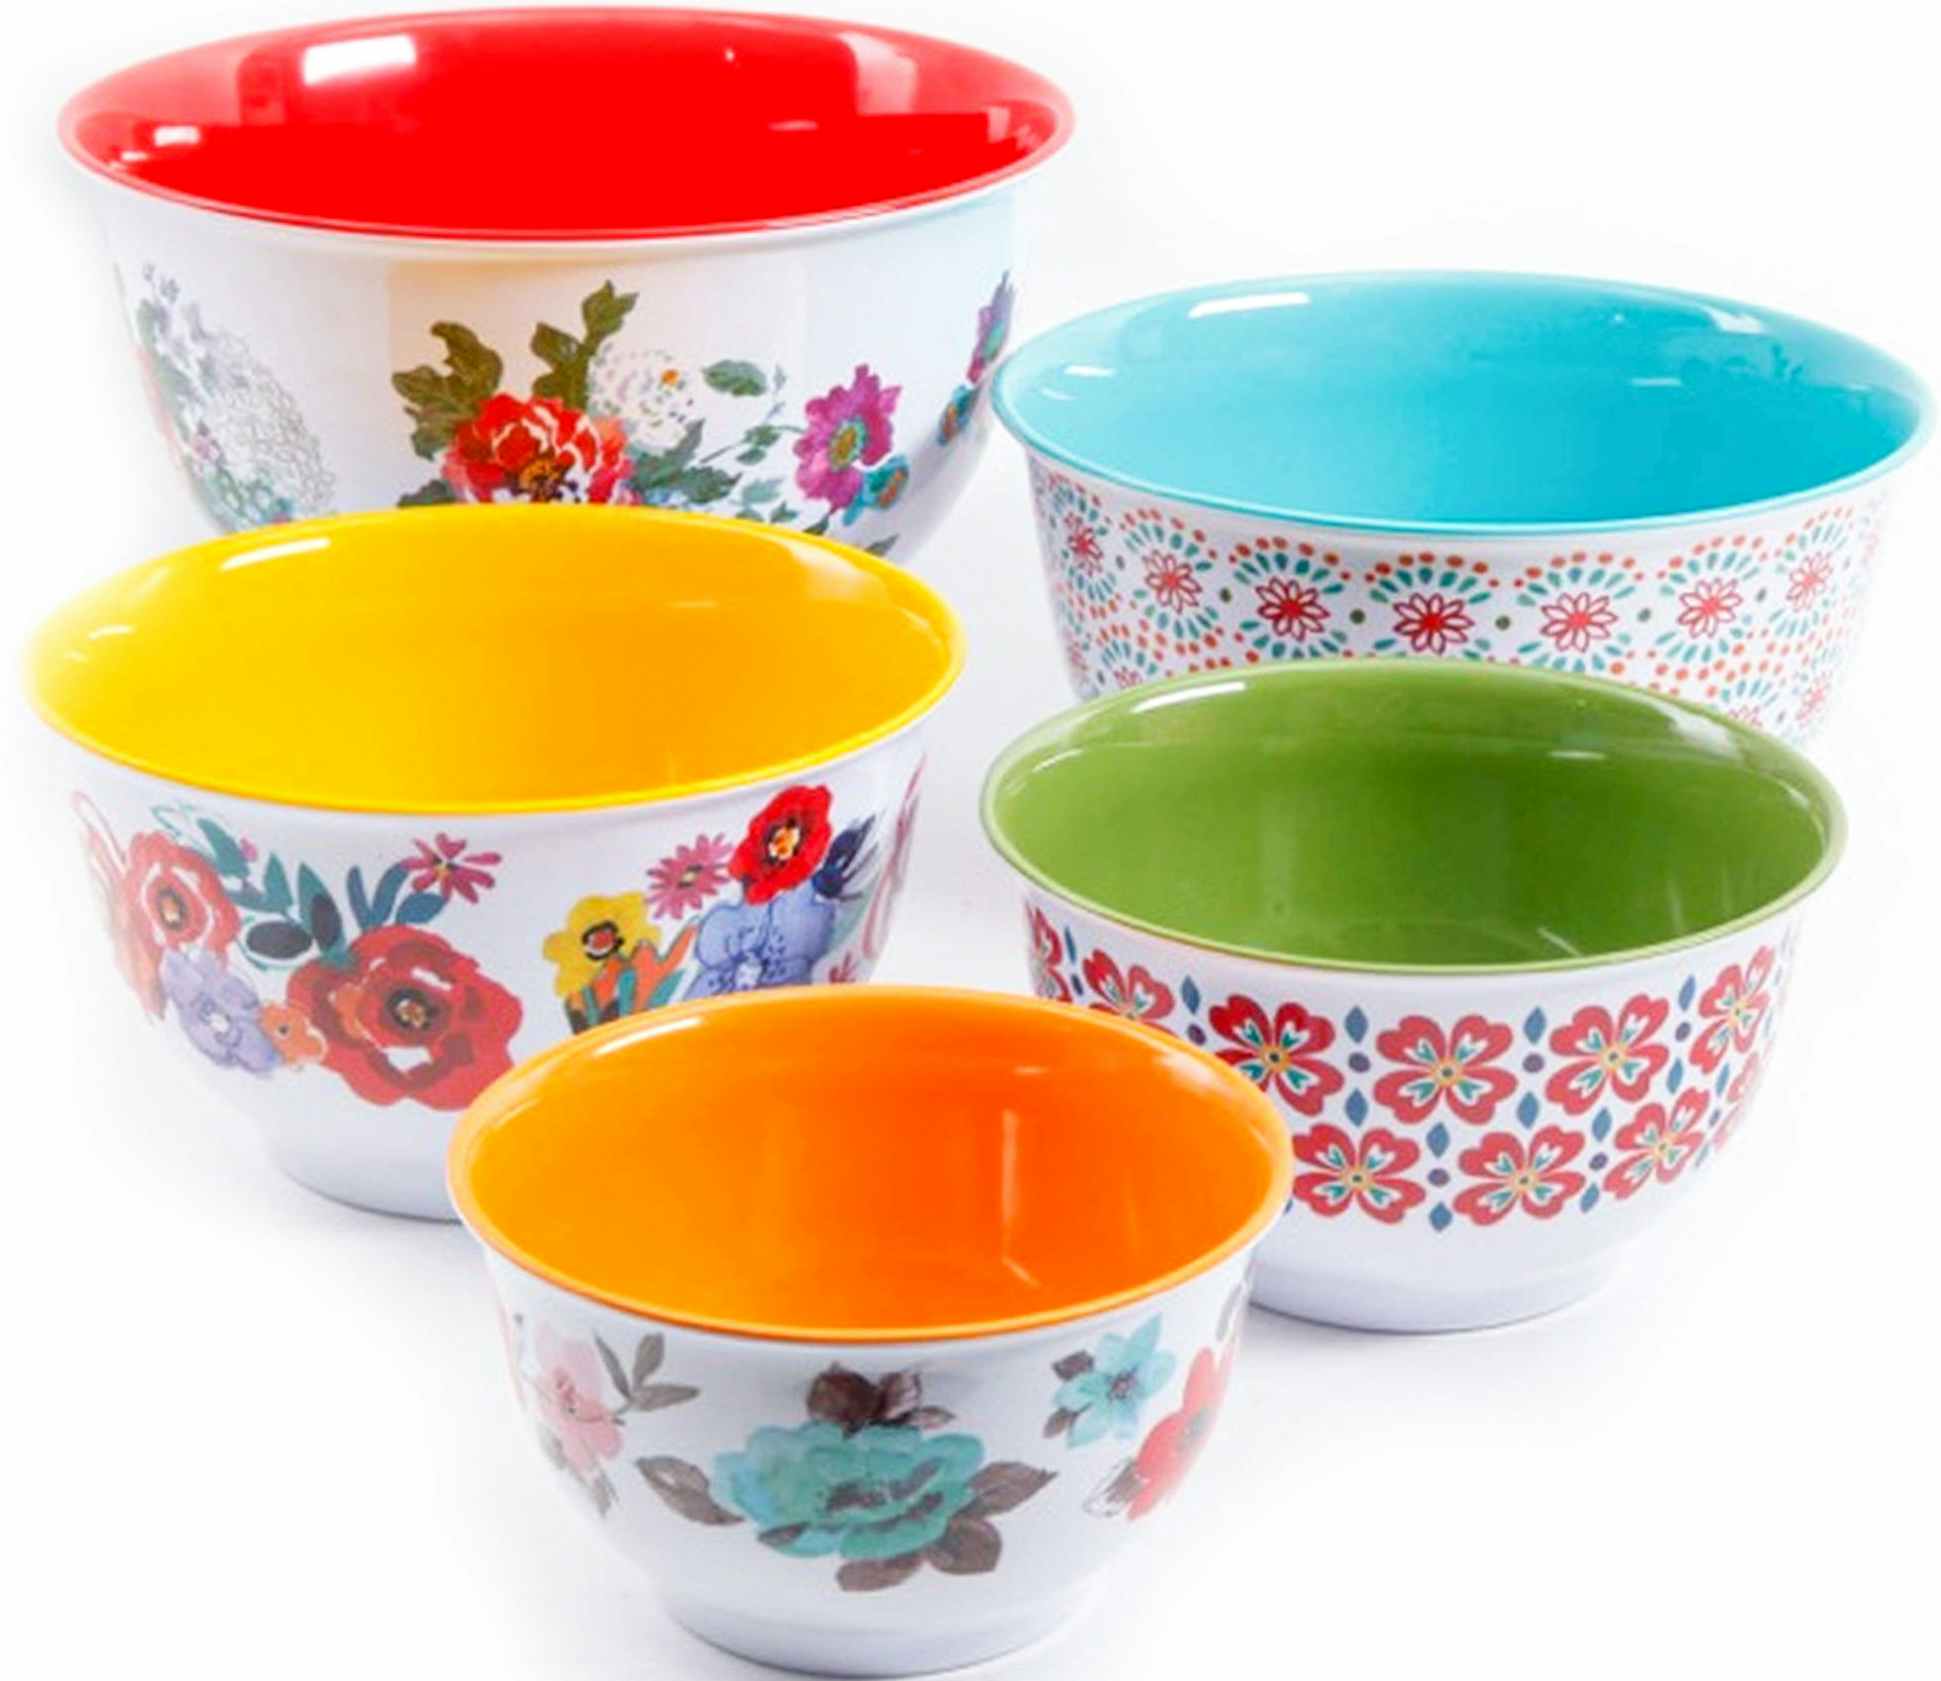 pioneer woman country garden mixing bowls